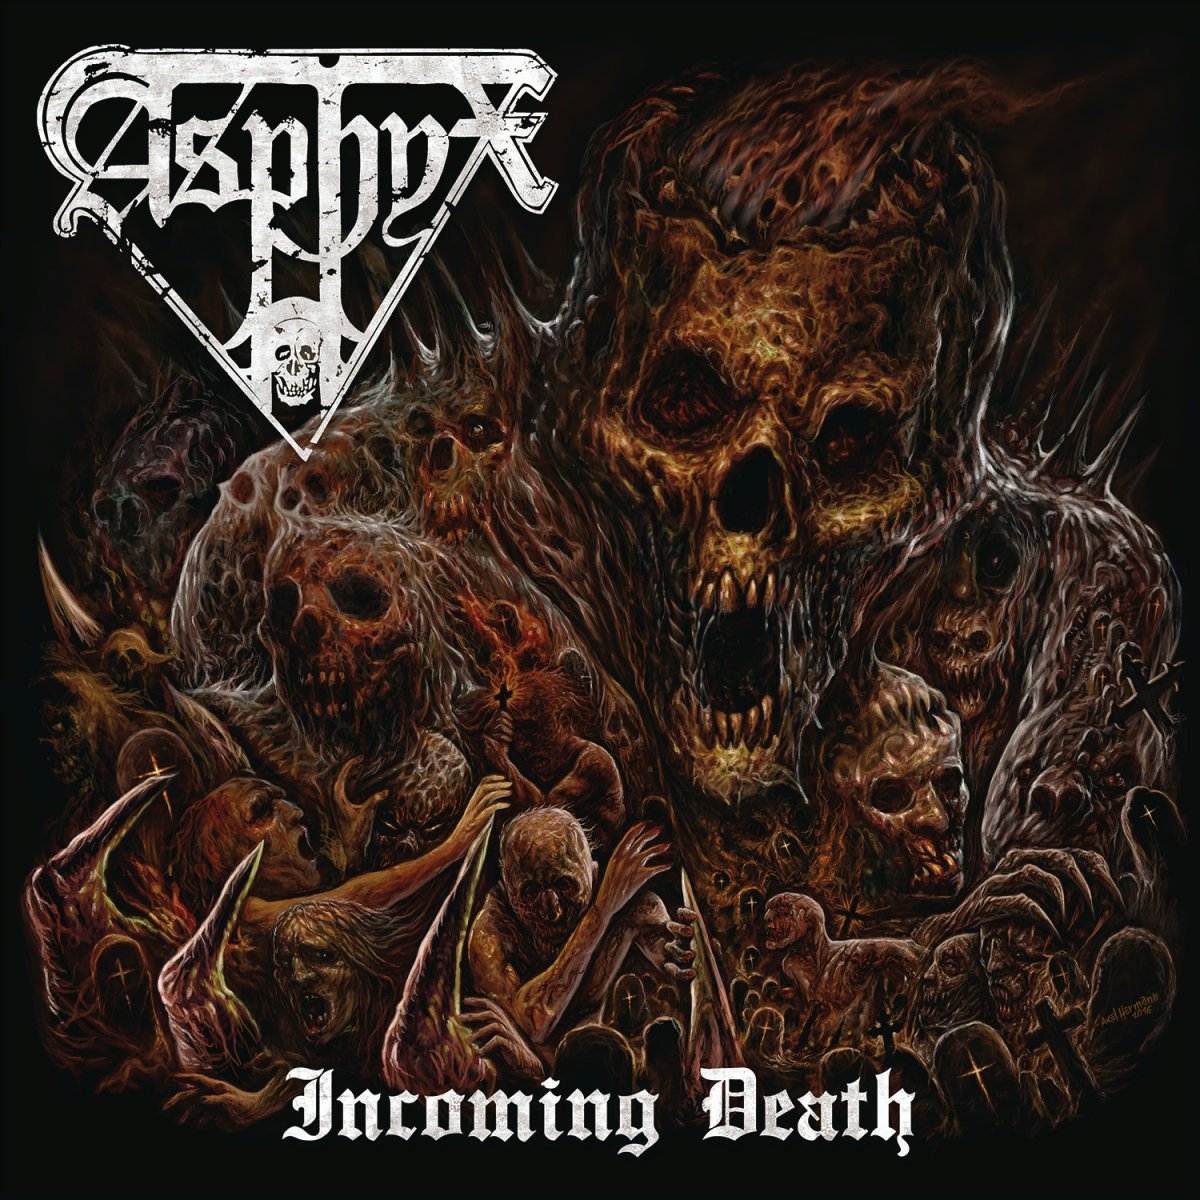 Incoming Death | Asphyx